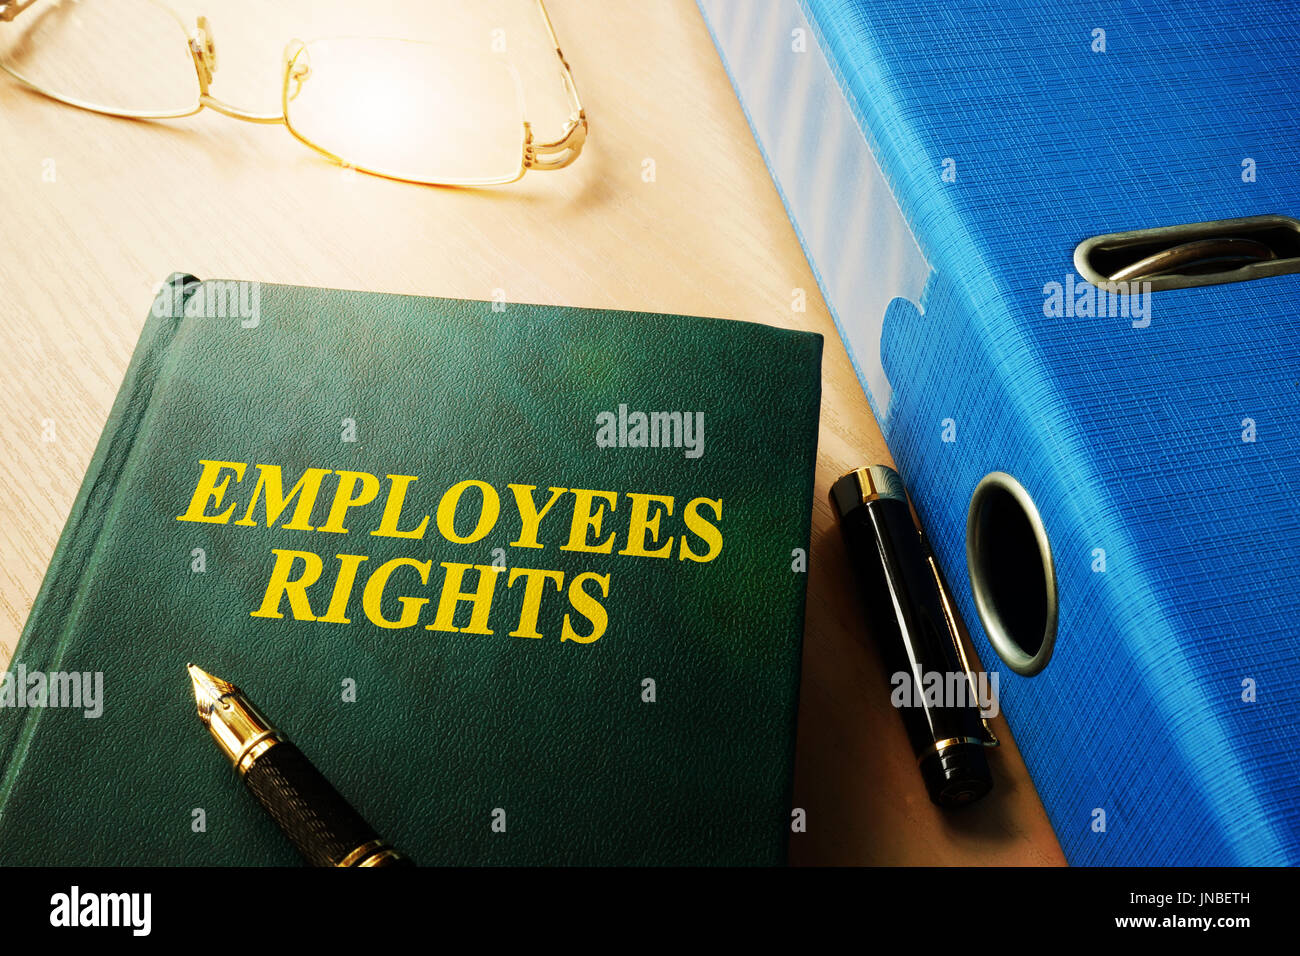 Employees Rights on an office table. Stock Photo